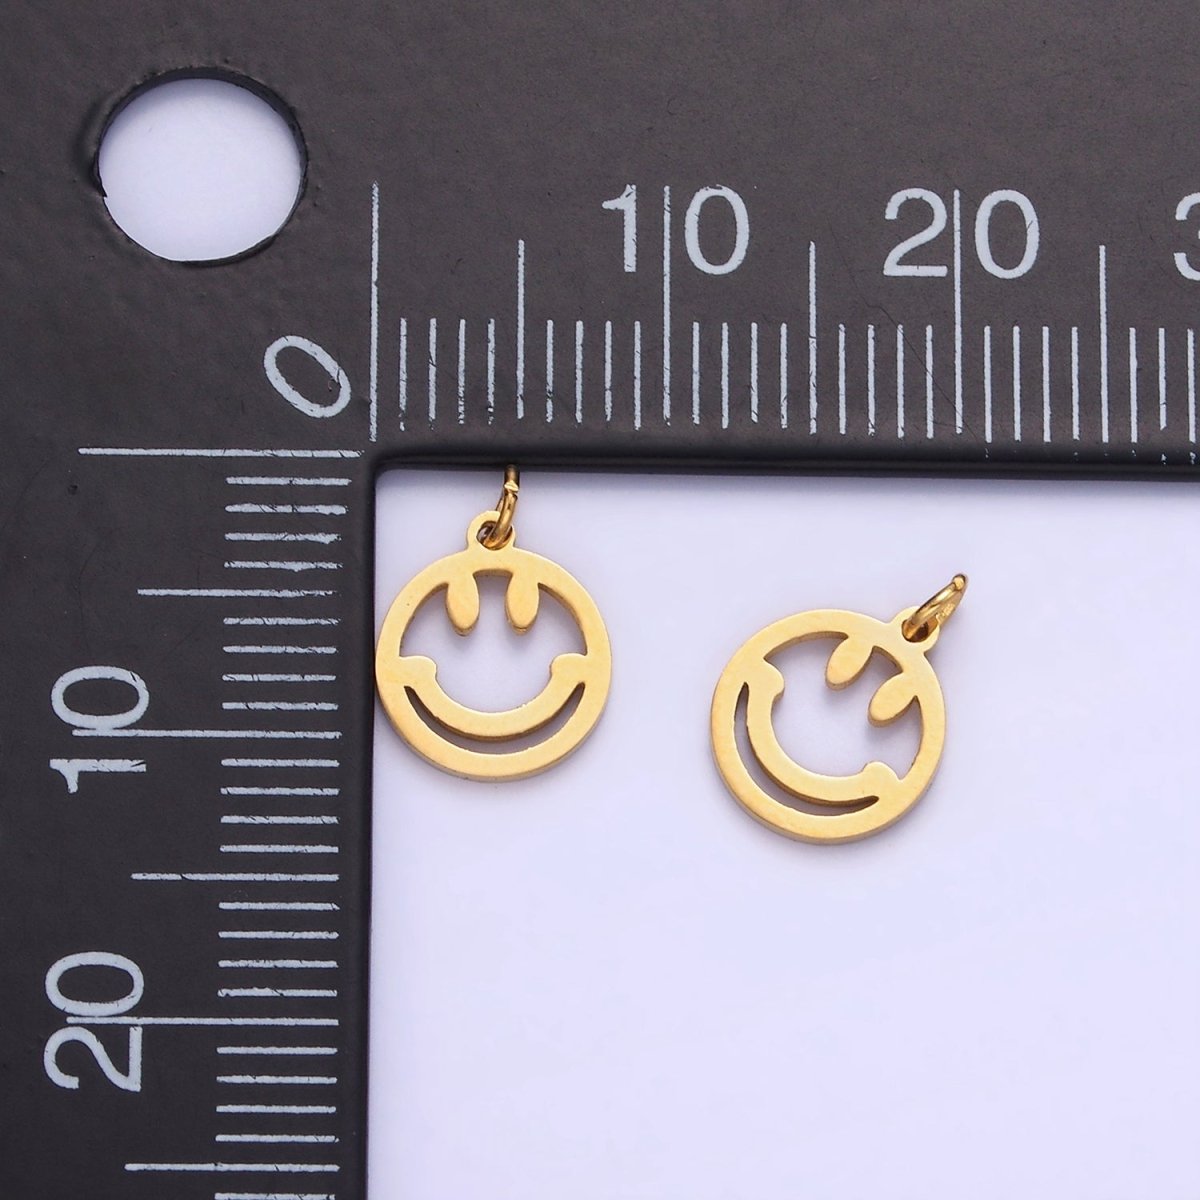 14K Gold Filled Smiley Face Emotion Open Round Charm | P951 - DLUXCA